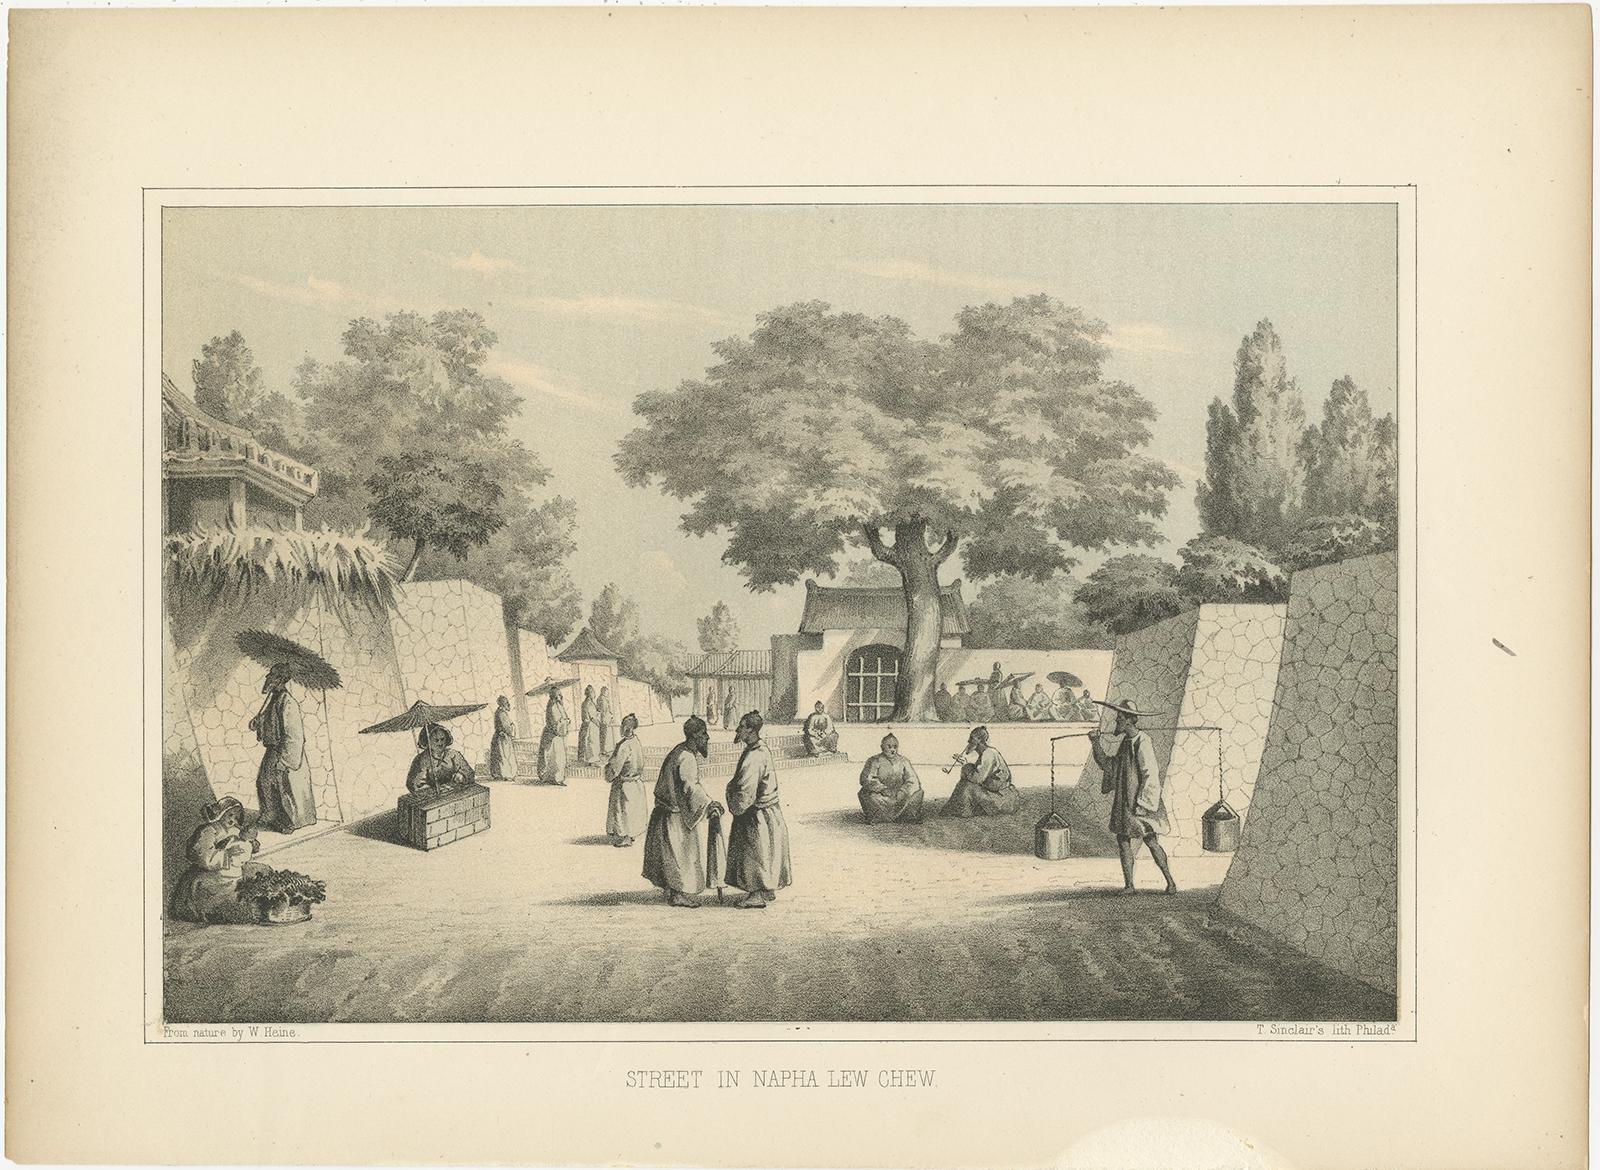 Antique print titled ‘Street in Napha Lew-Chew'. 

Antique print of a street scene in Naha, the capital city of the Okinawa Prefecture, Japan. Okinawa used to be called Great Lew Chew Island. This print originates from 'Narrative of the expedition